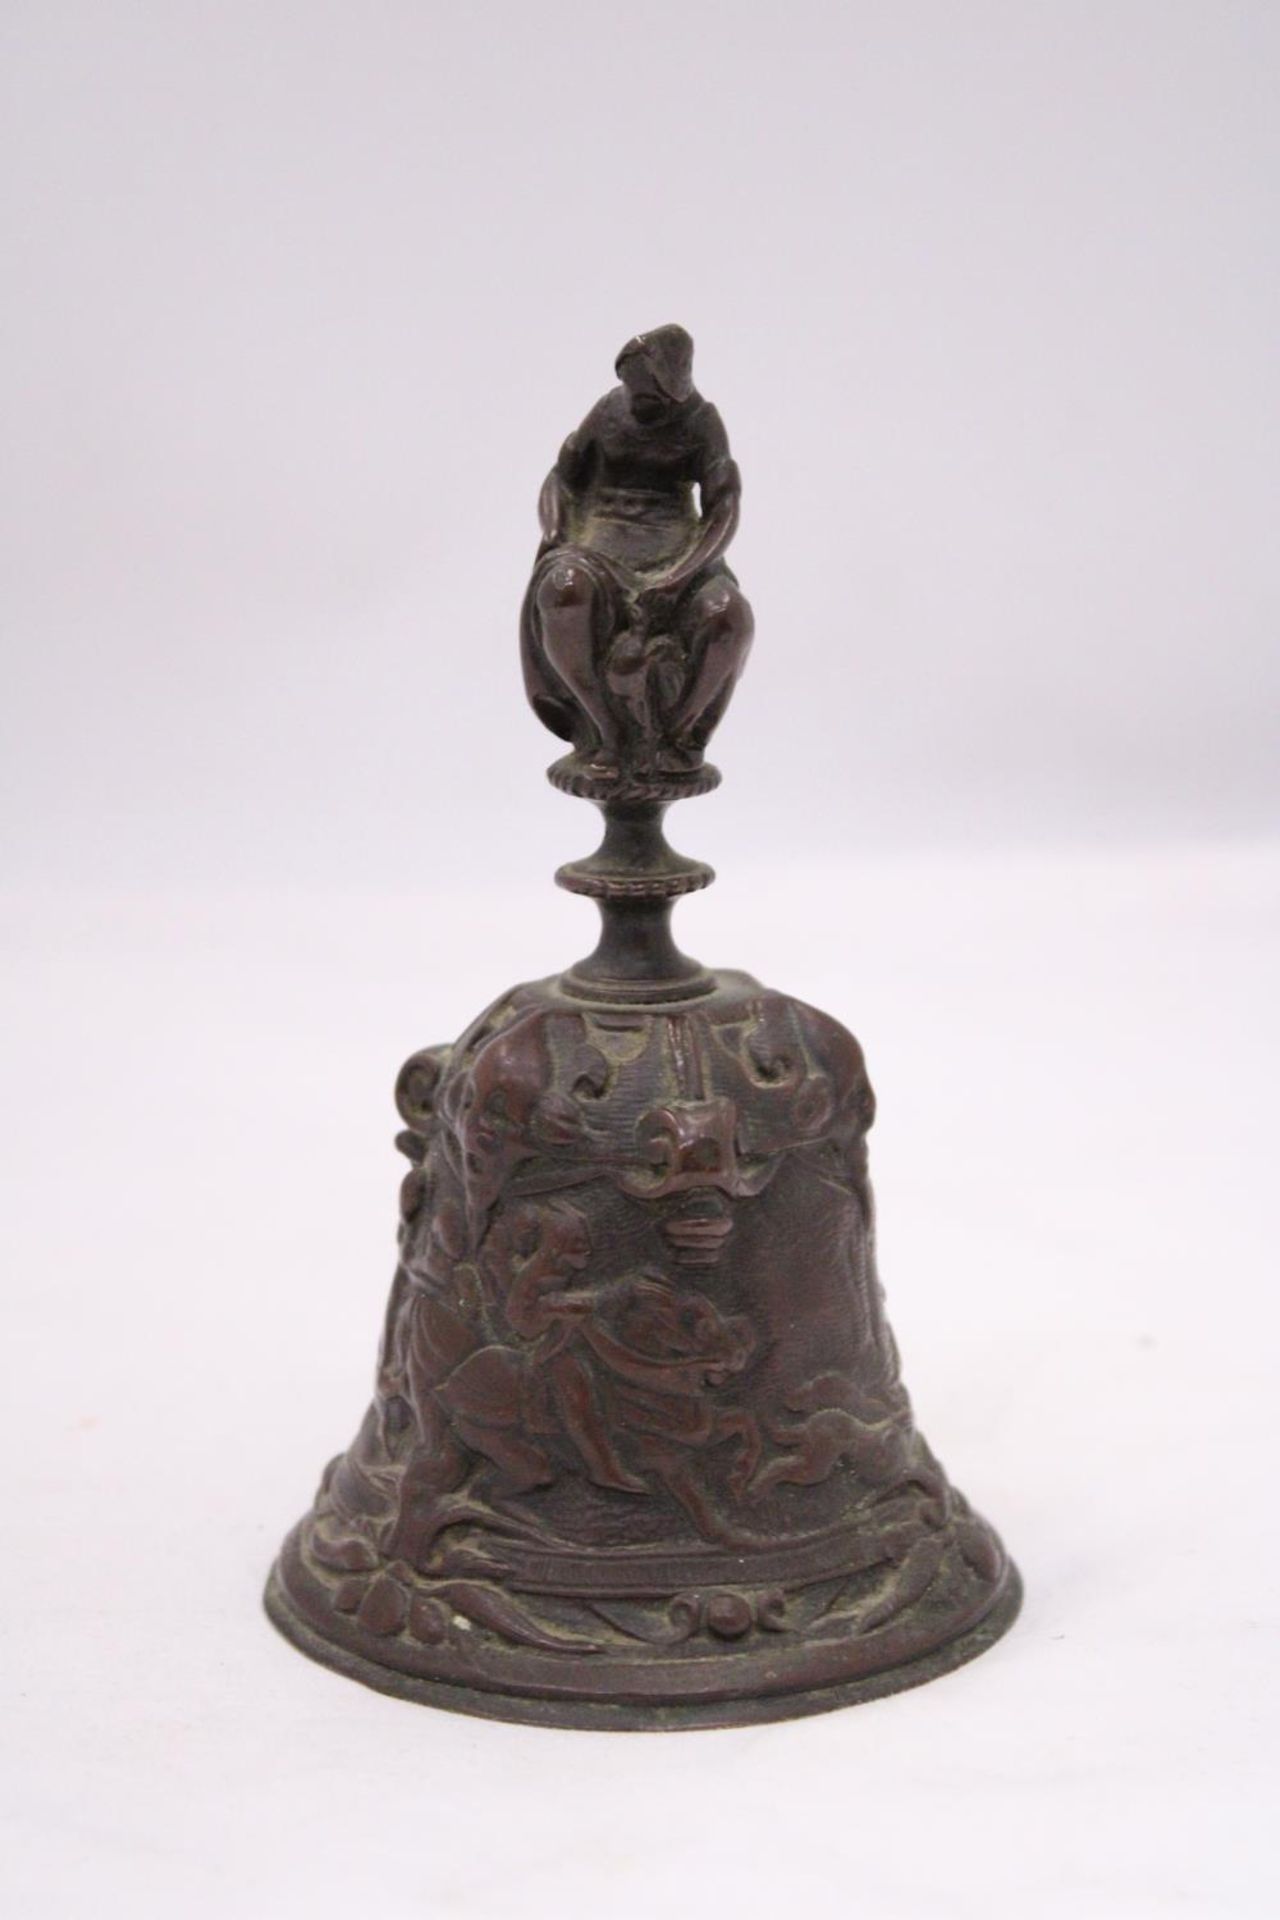 A ORIENTAL BRONZE BELL DEPICTING A HUNTING SCENE AROUND BASE OF BELL - Image 2 of 6